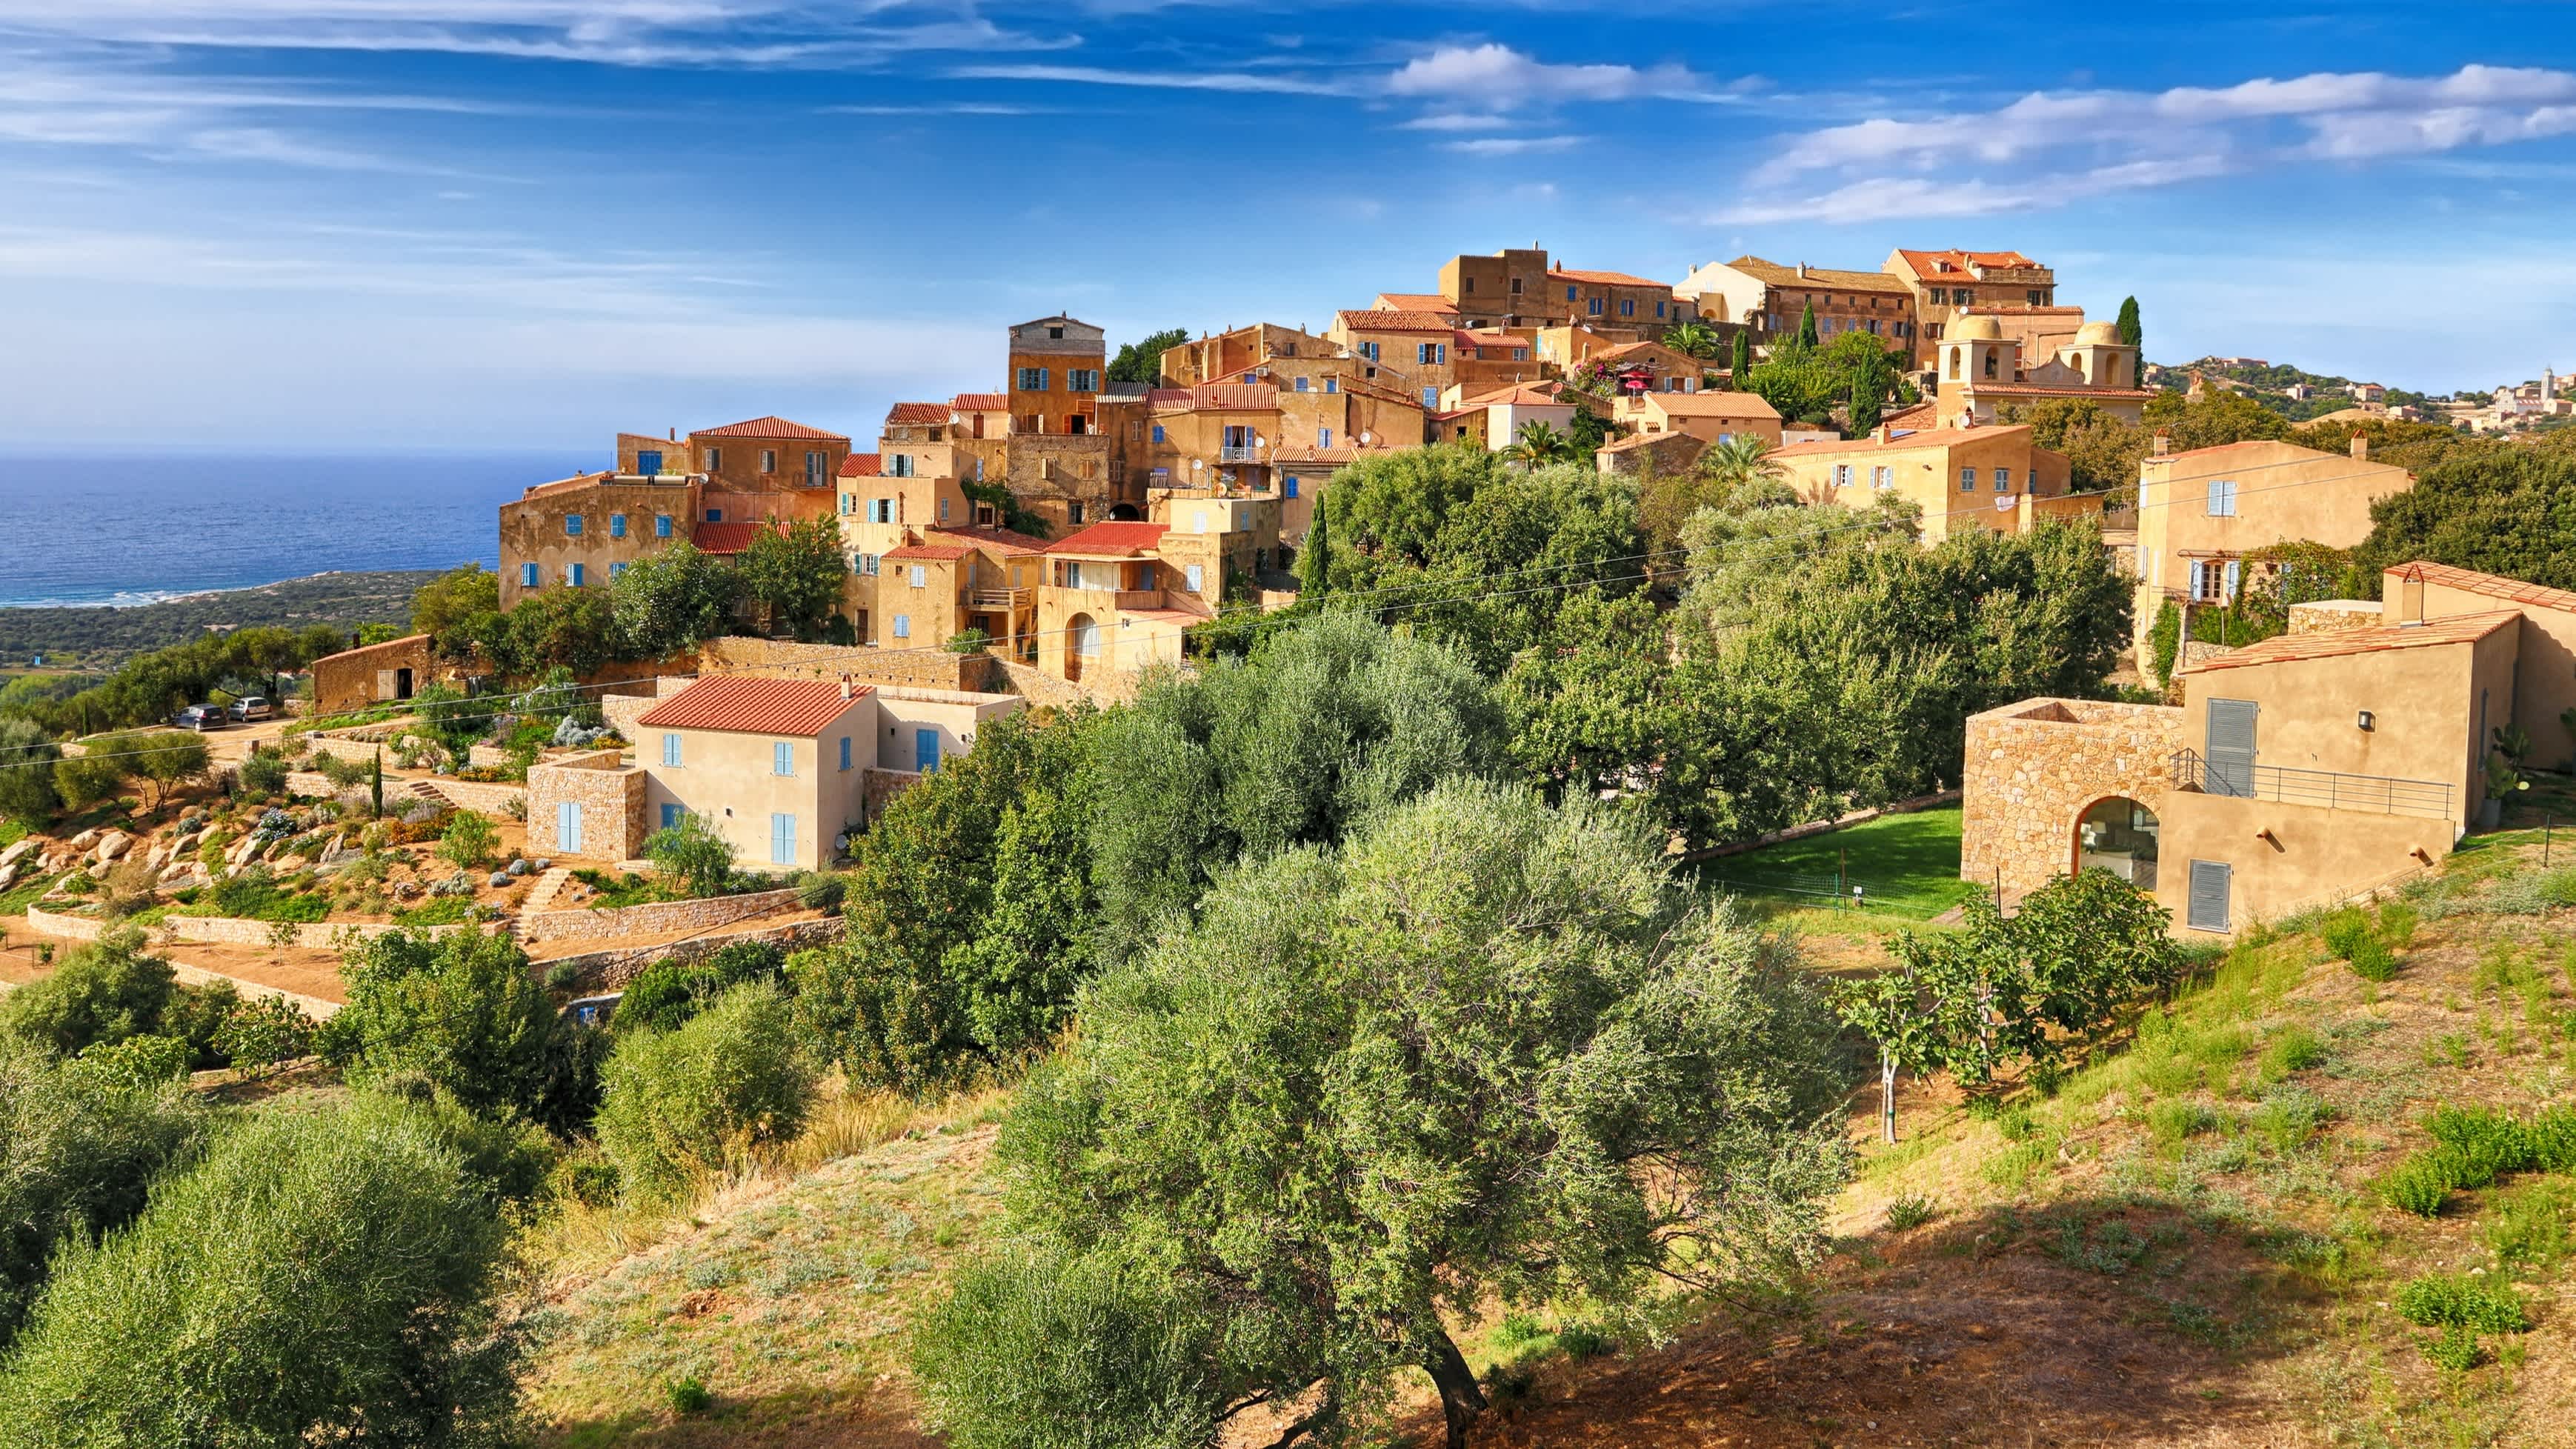 View of a picturesque village on the island of Corsica